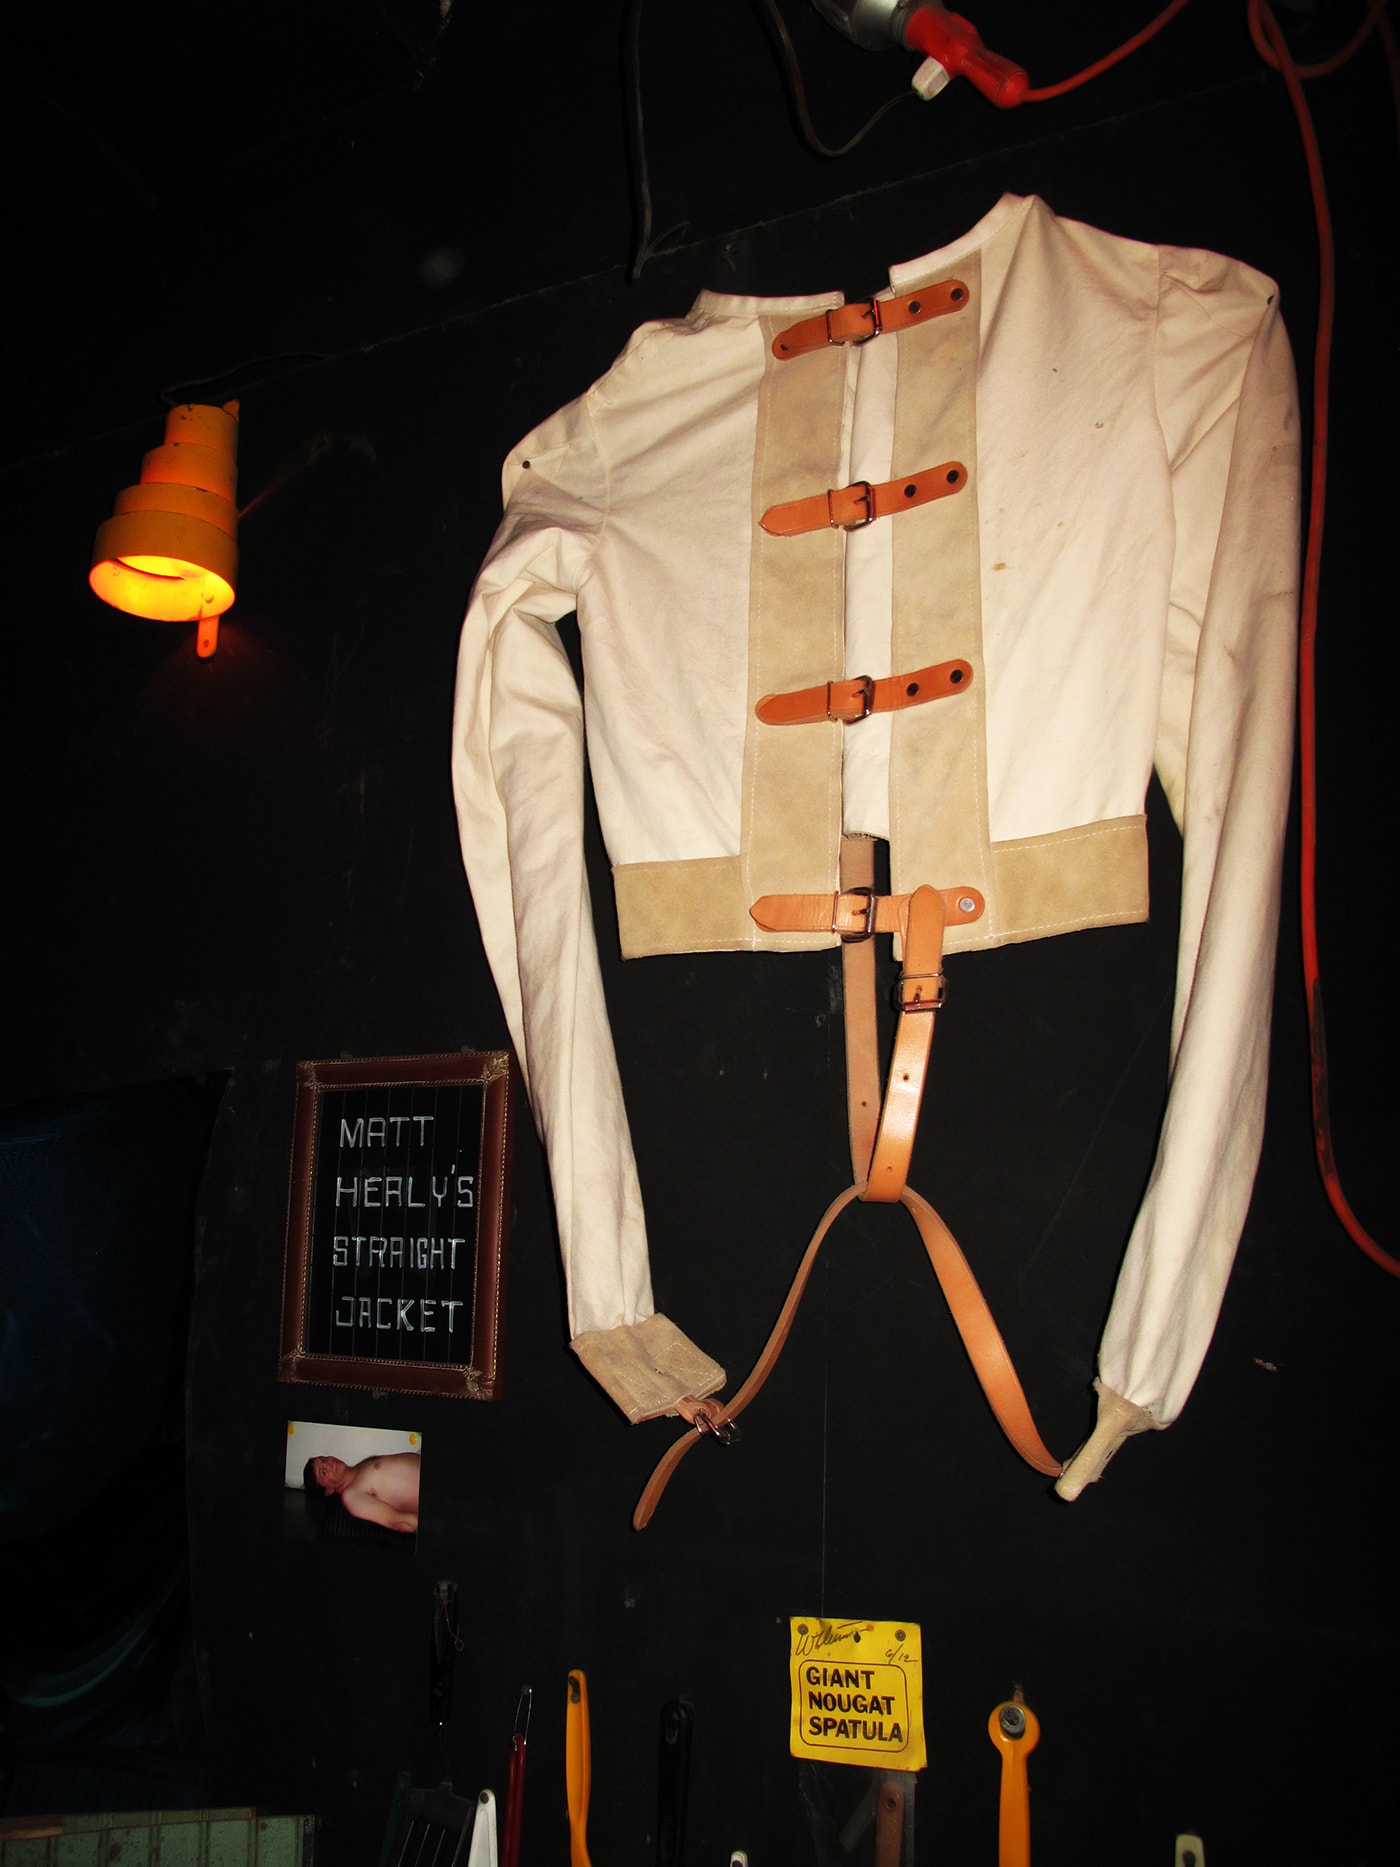 Matt Healy's straight jacket in the City Museum's Museum of Mirth, Mystery and Mayhem in St. Louis, Missouri.